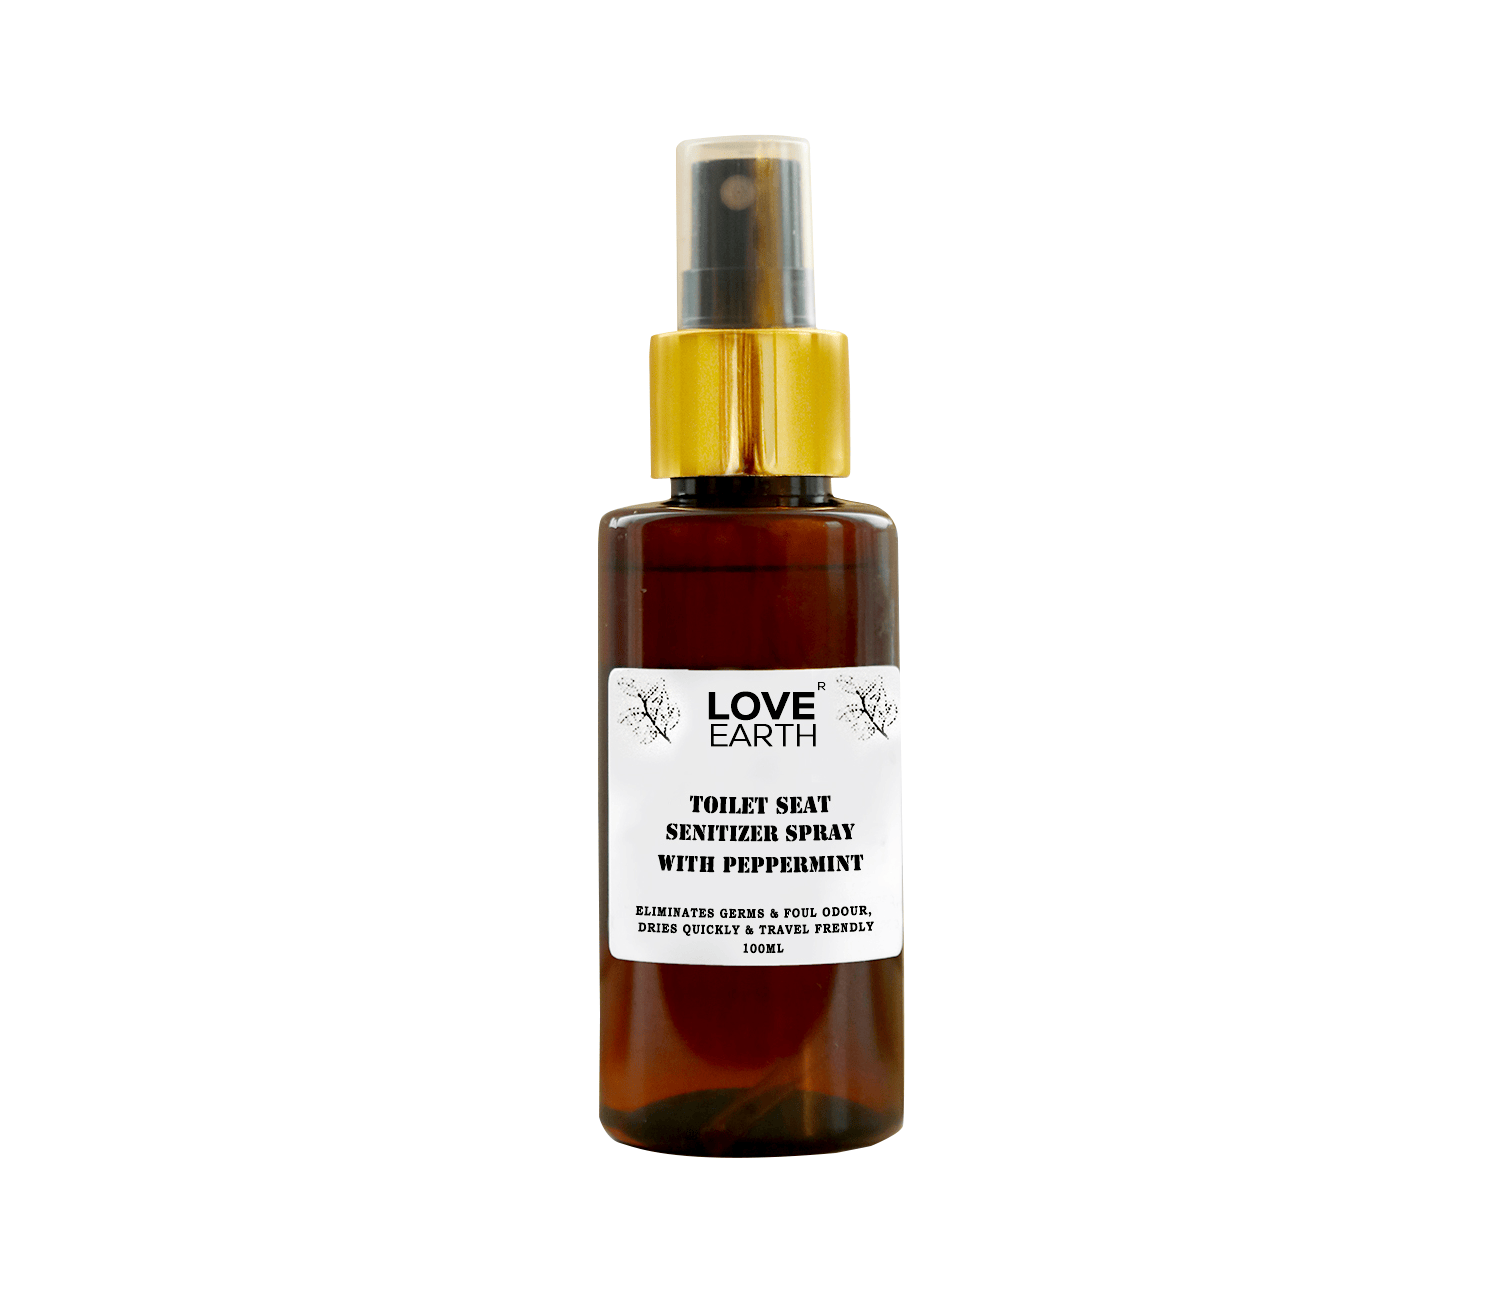 LOVE EARTH | Love Earth Toilet Seat Sanitizer Spray with Peppermint, Eliminates Germs & Foul Odour 100ml